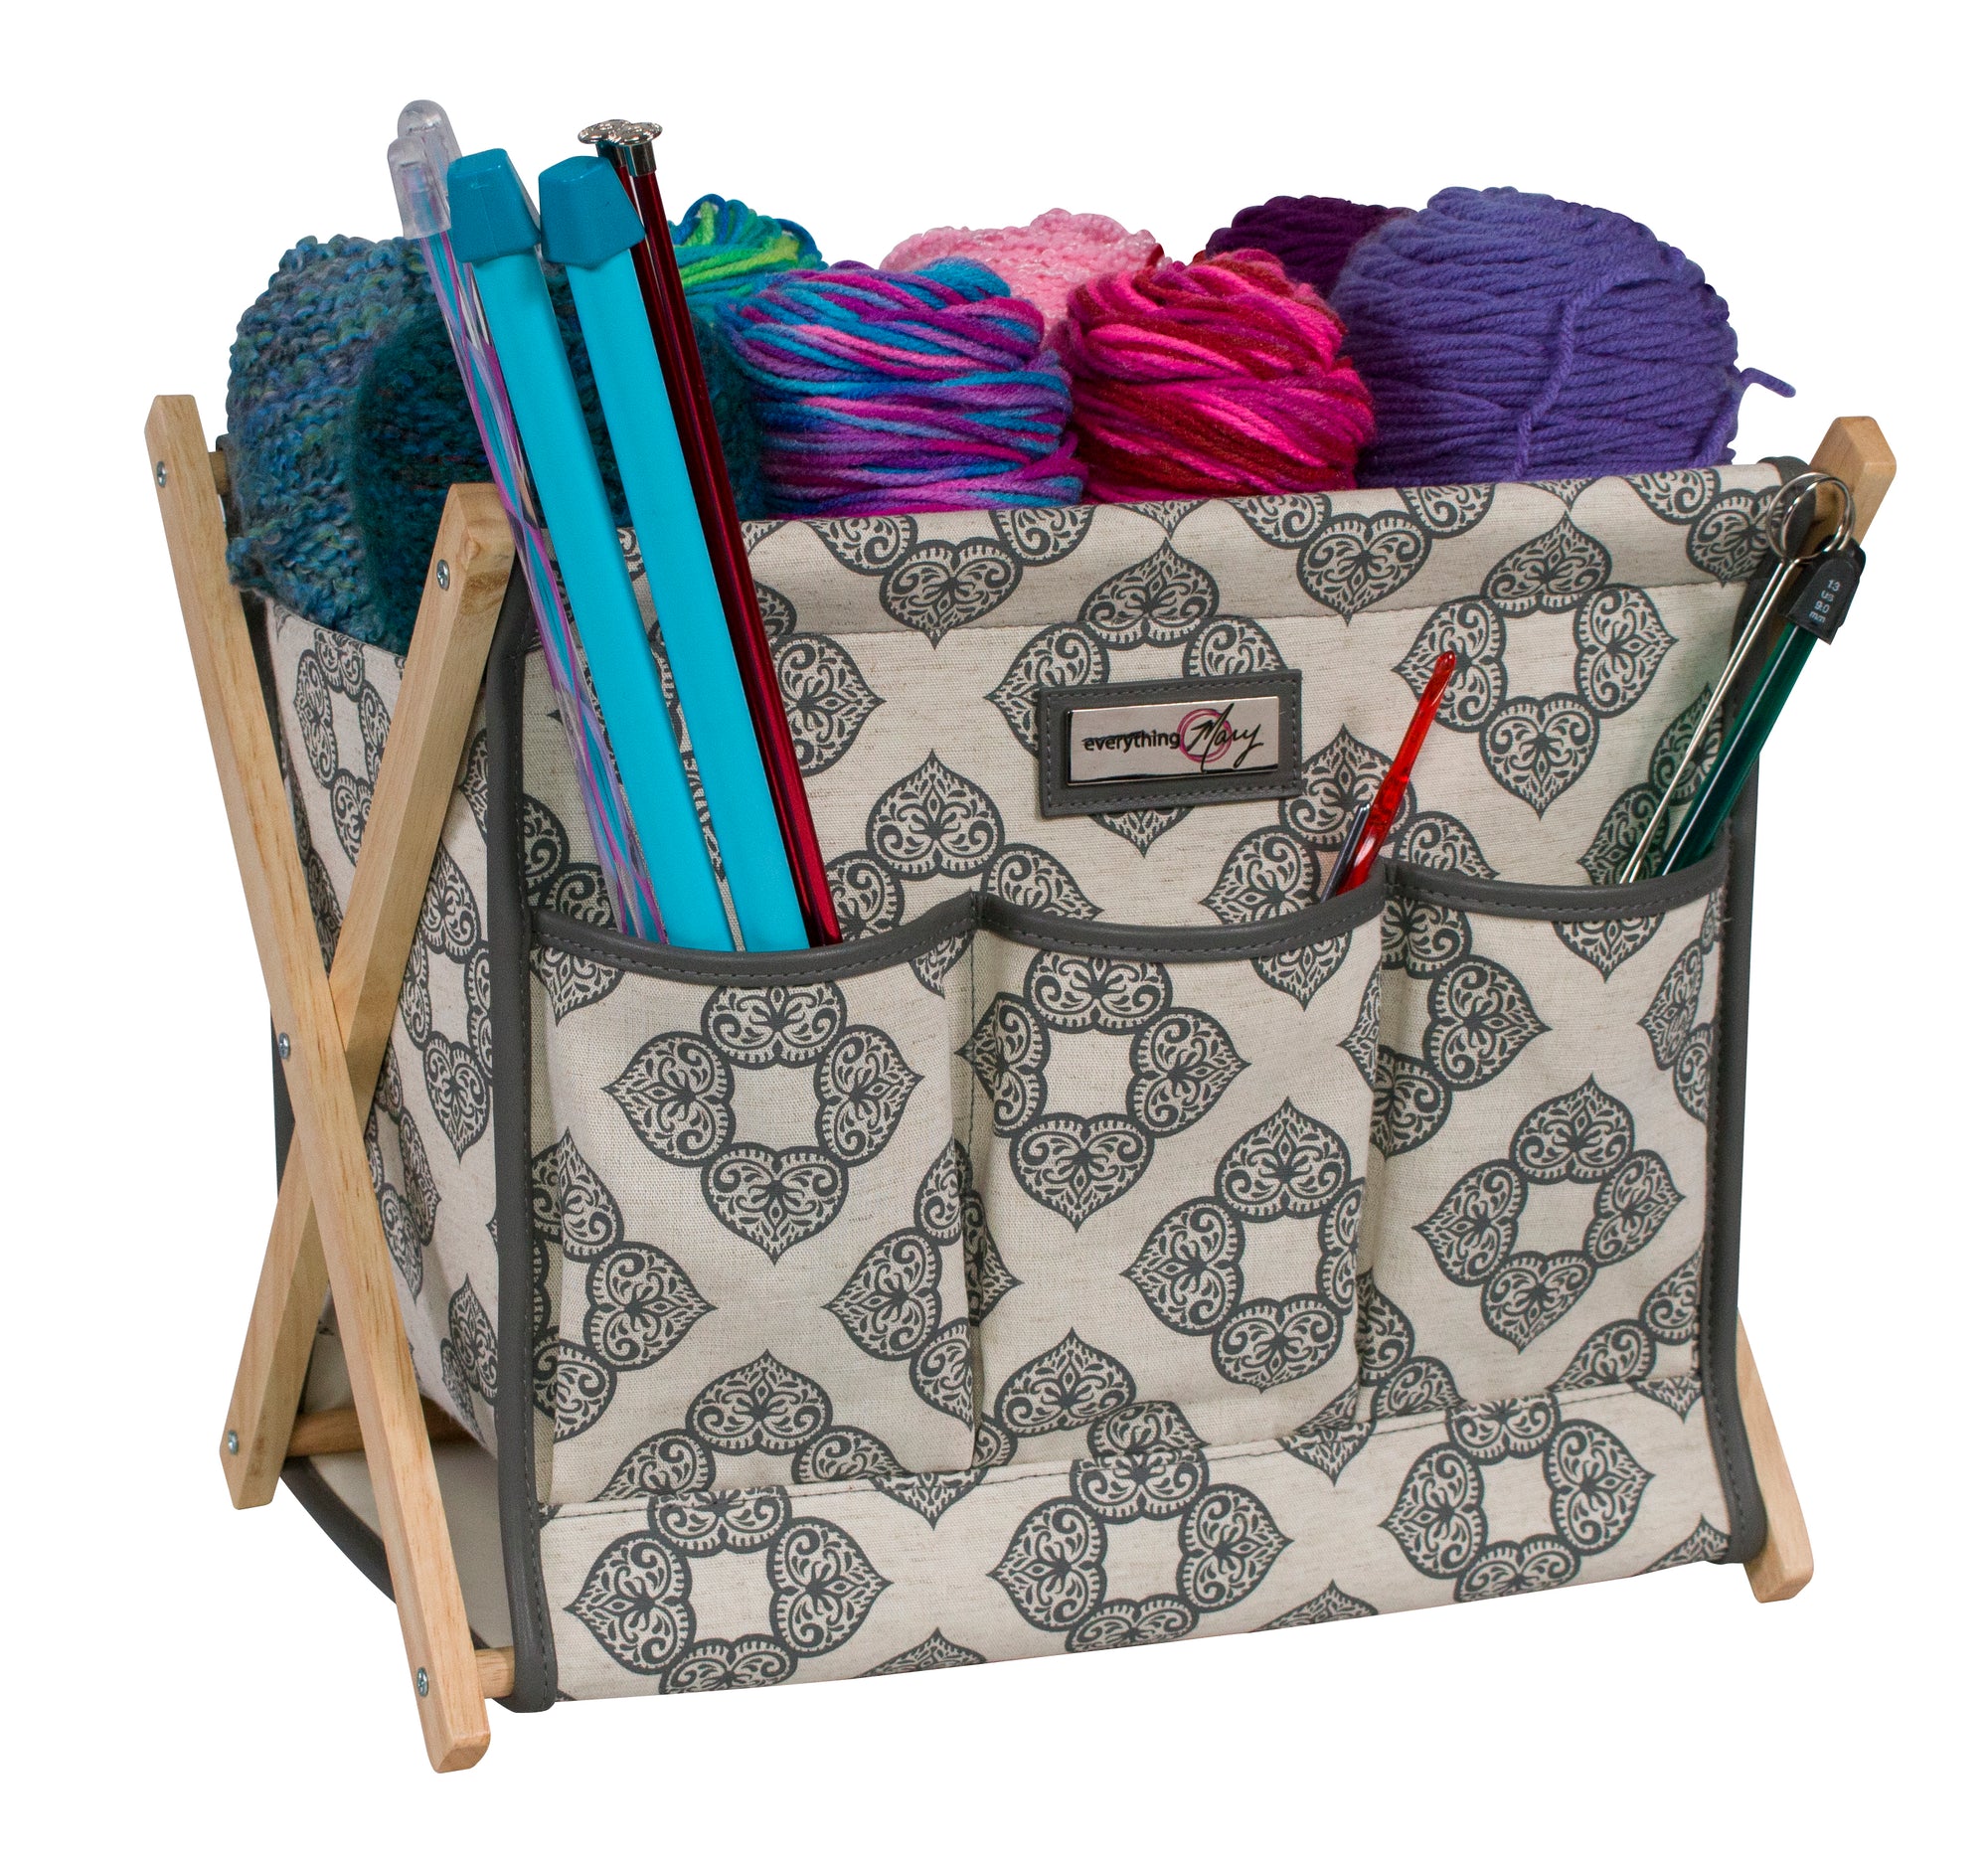 Discover our Foldable Yarn Caddy 🧶 